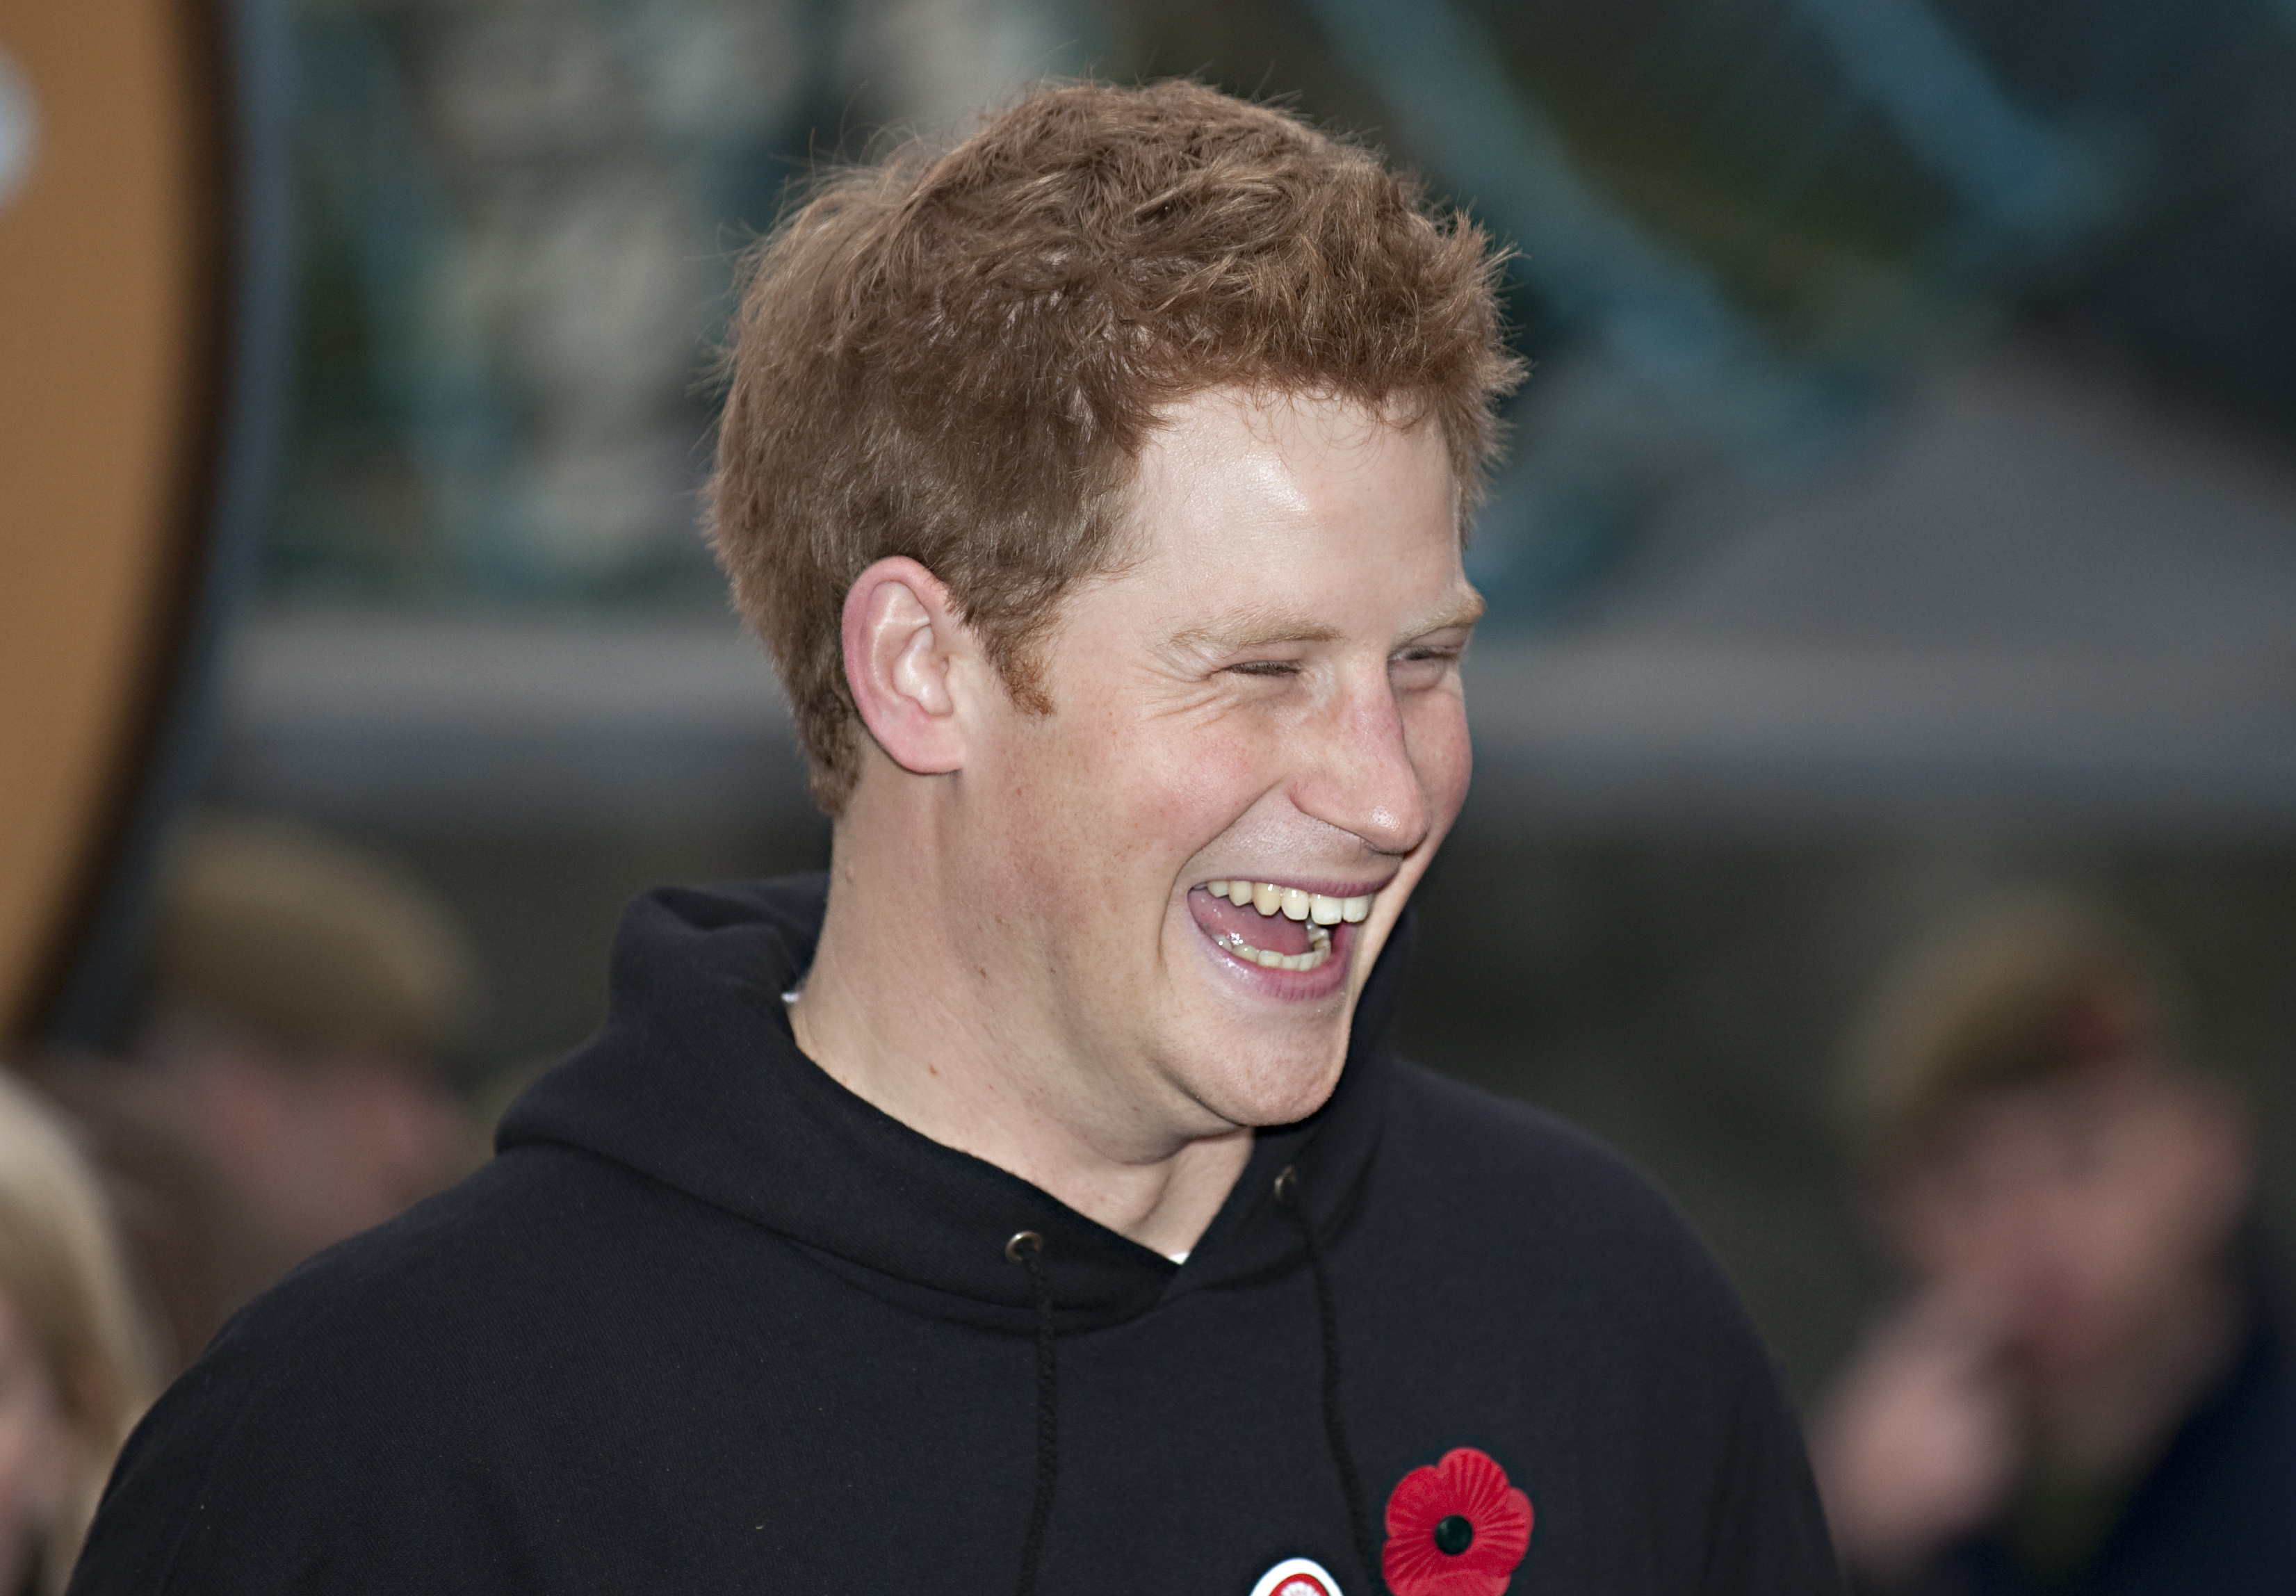 Prince Harry during the launch of The Soldier Challenge at The Imperial War Museum in London, England on November 5, 2010. | Source: Getty Images